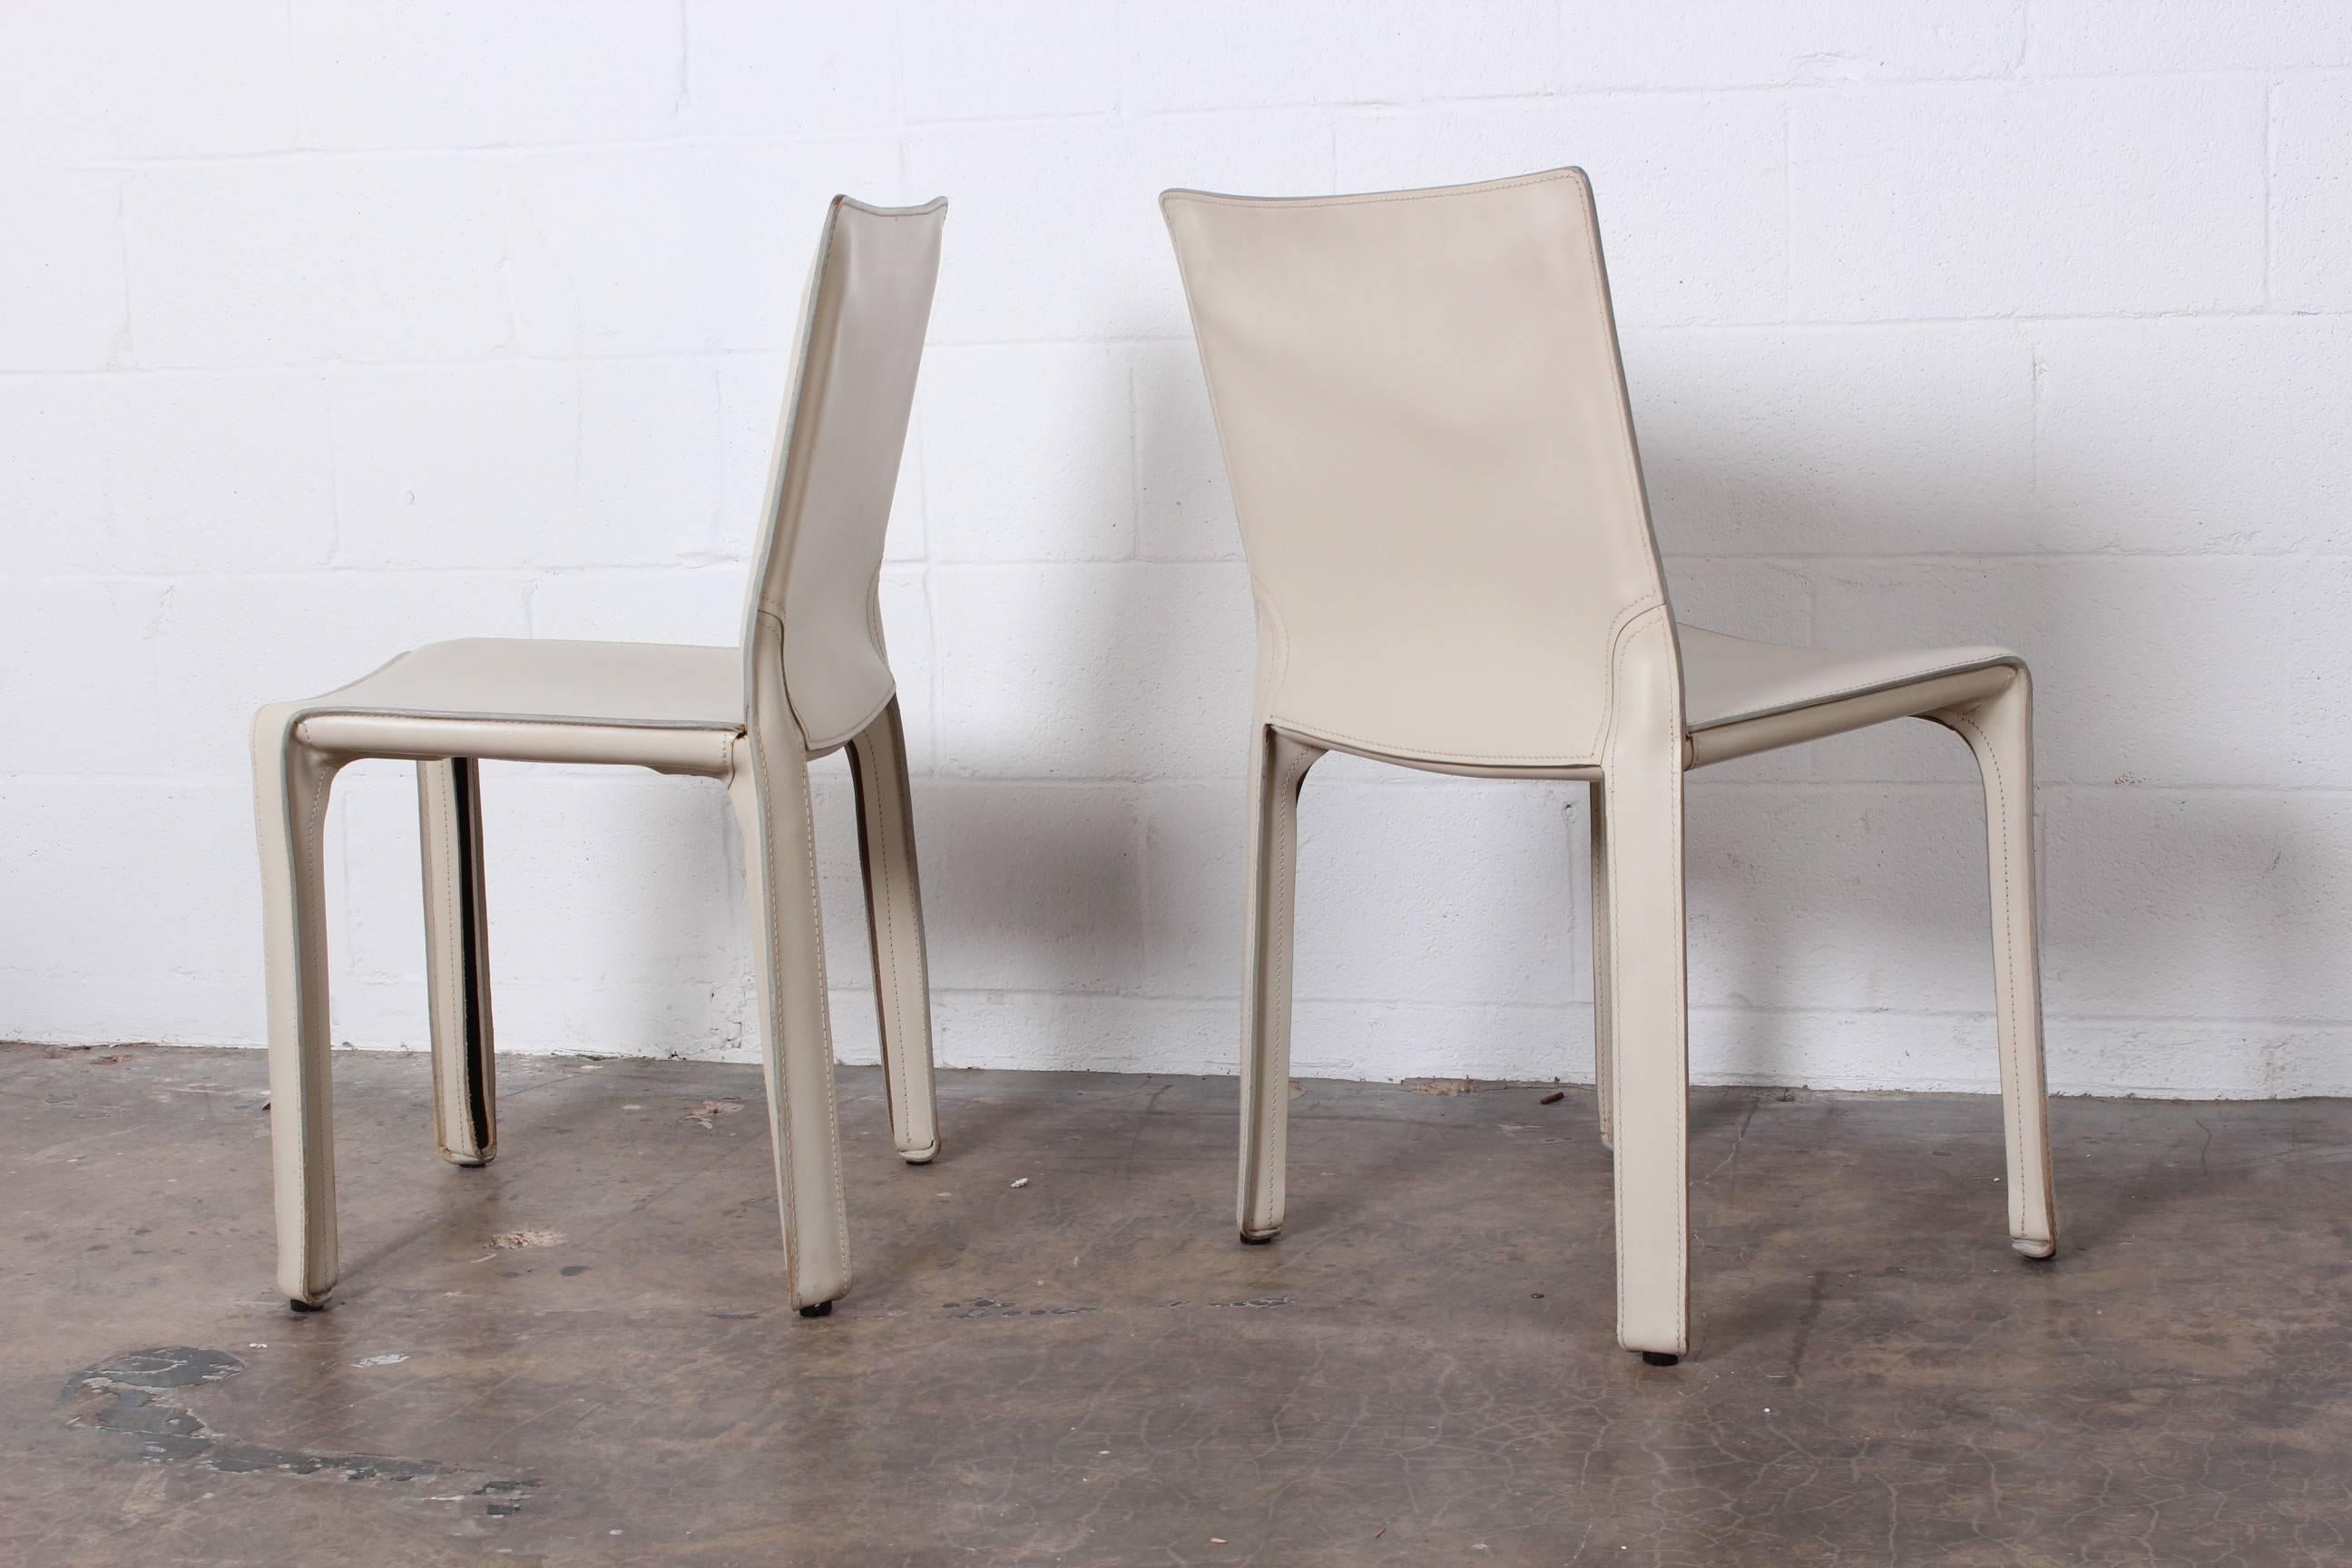 A set of six ivory Cab chairs designed by Mario Bellini for Cassina.